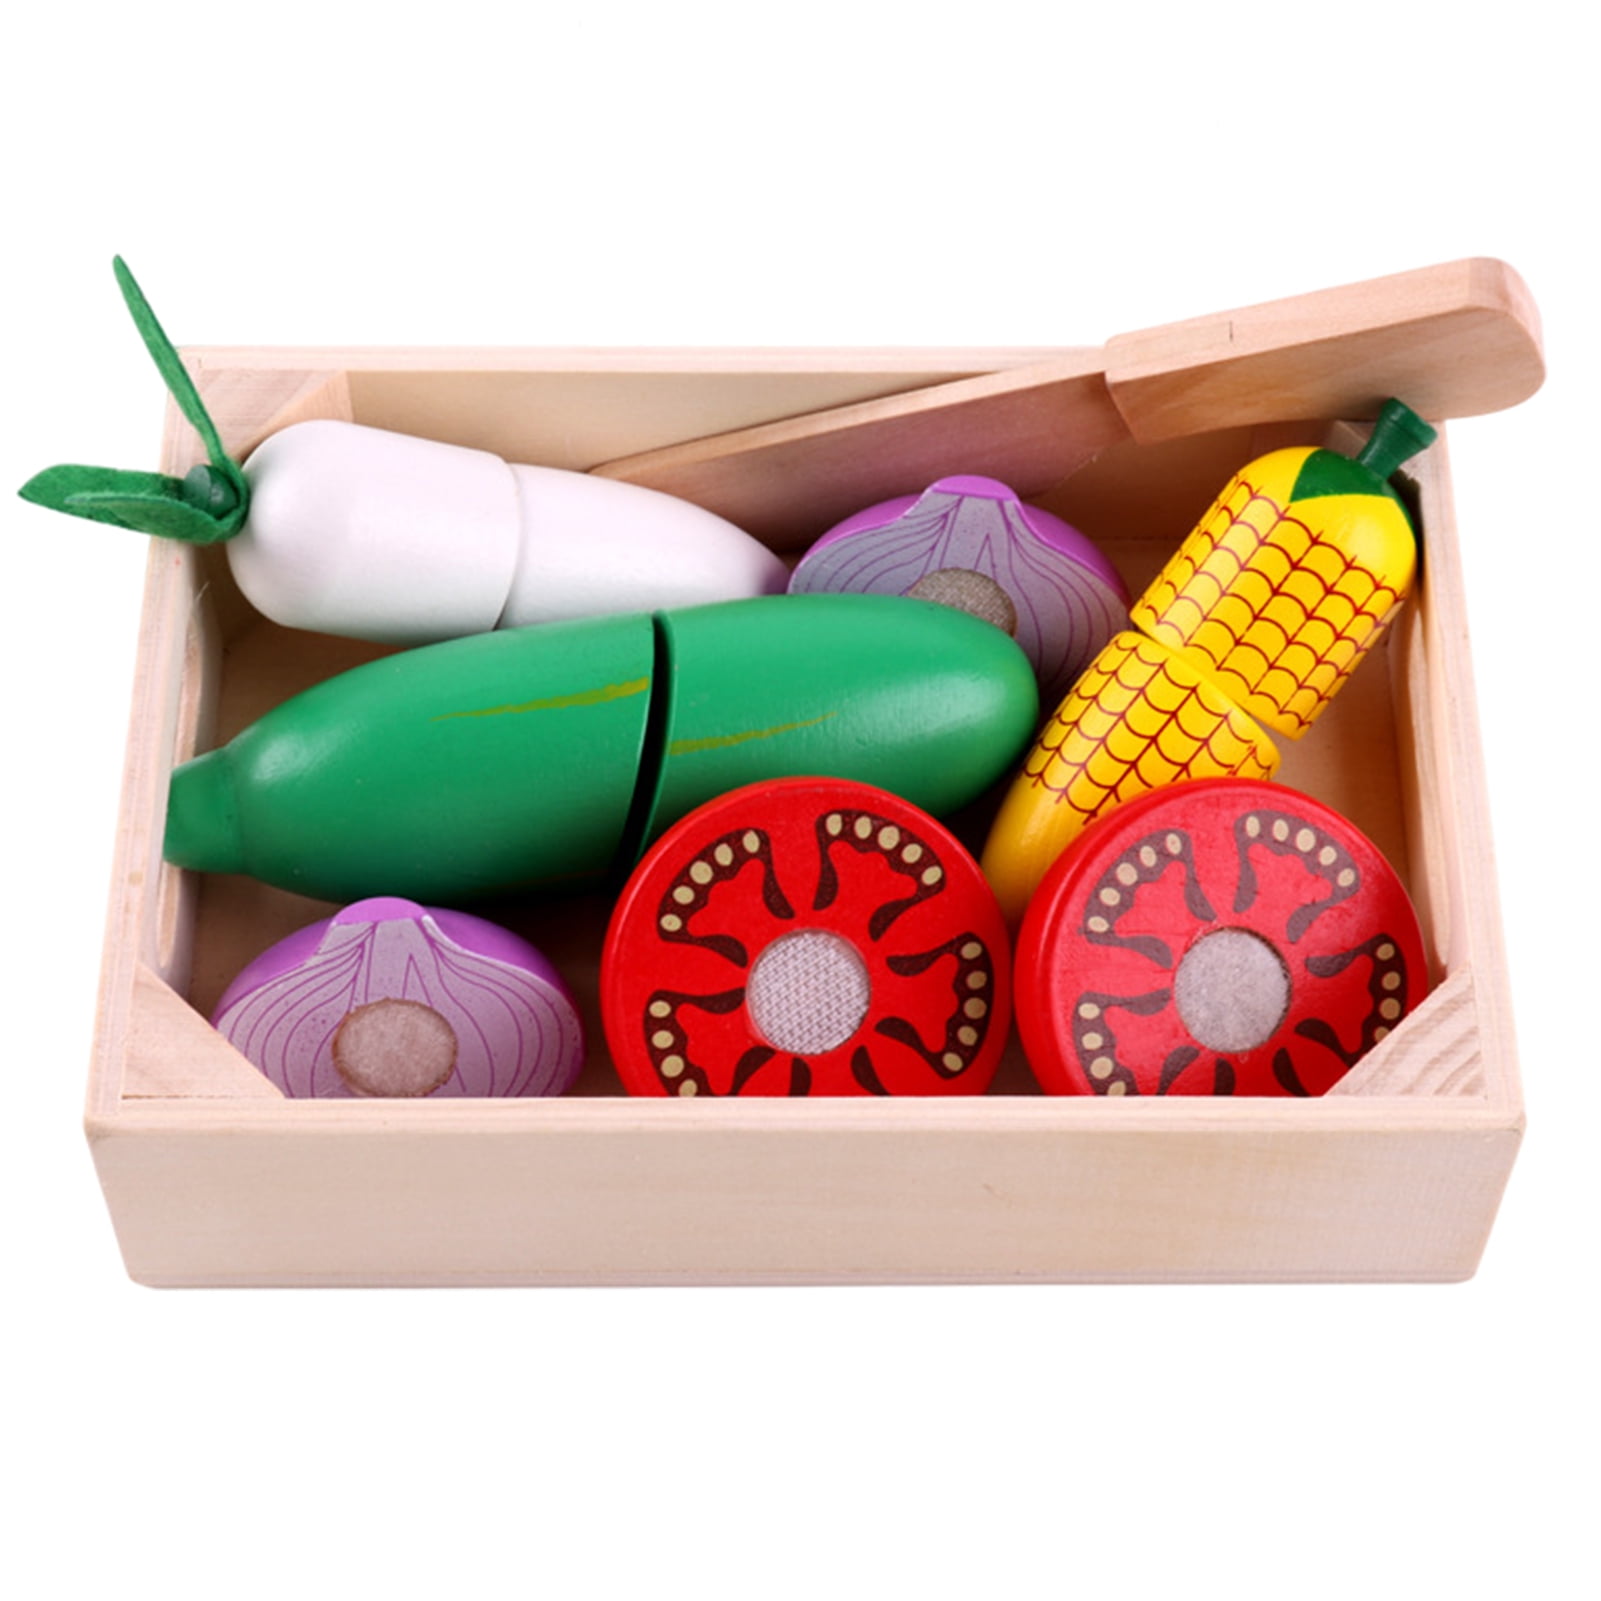 Details about   Educational Food Set Play Food Role Play Accessories Multicolor Playset 